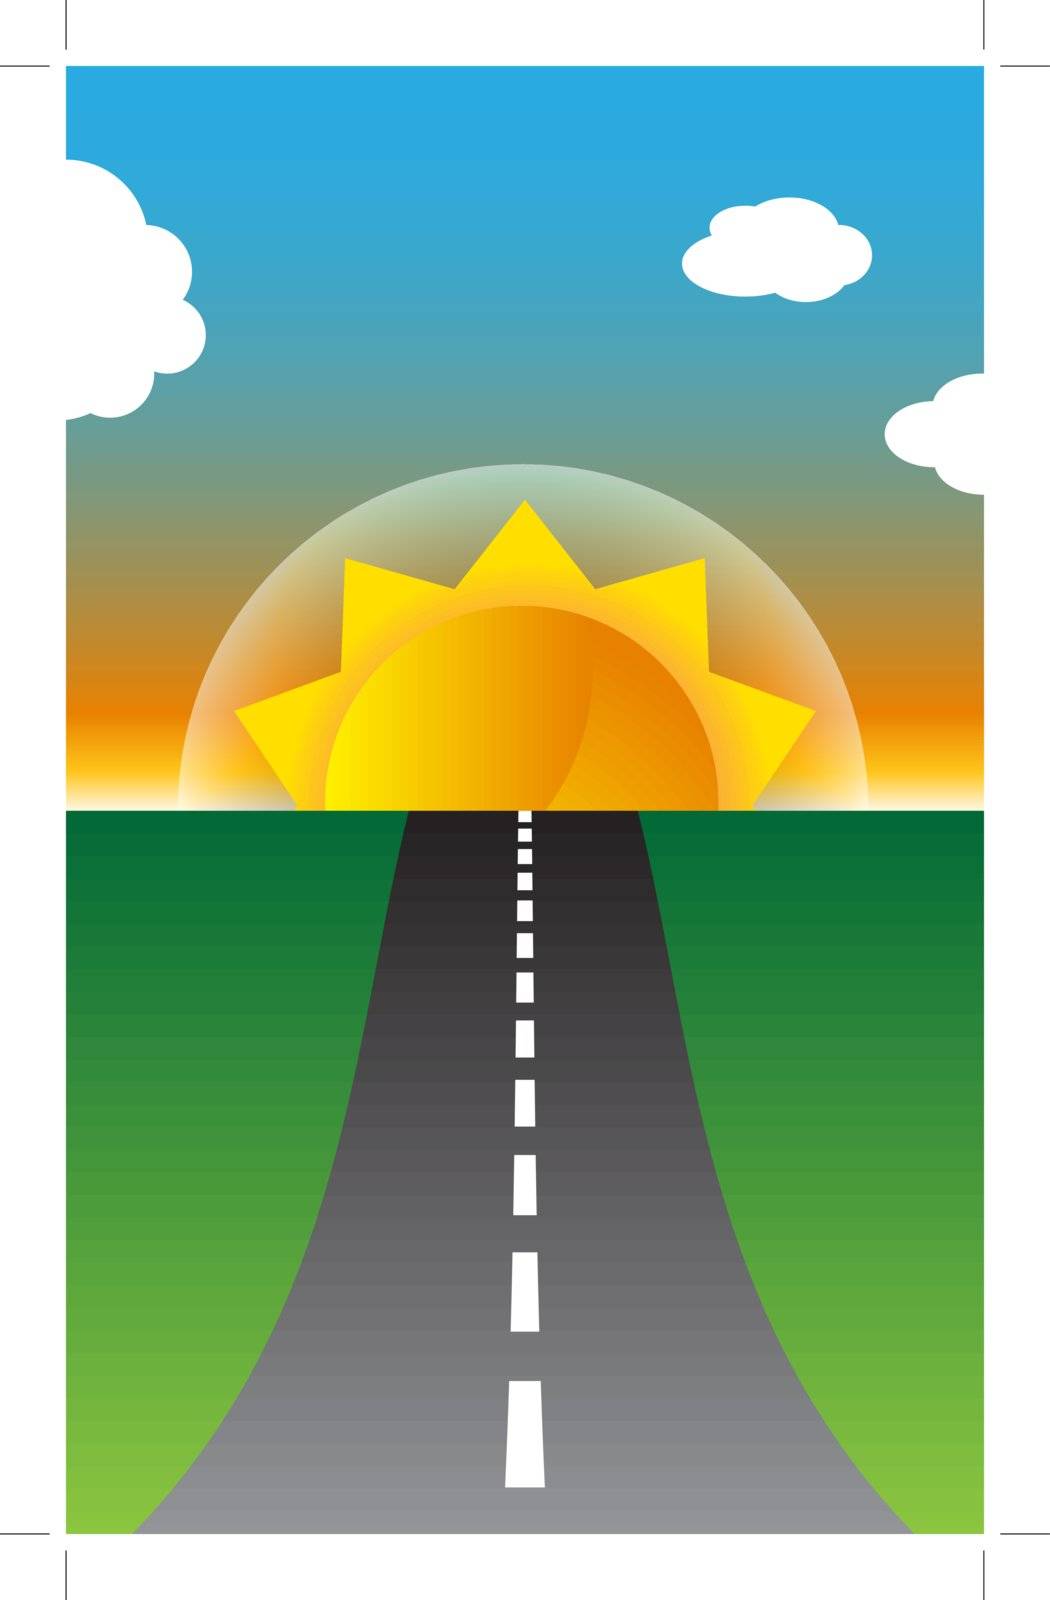 An image representing a sunny road.